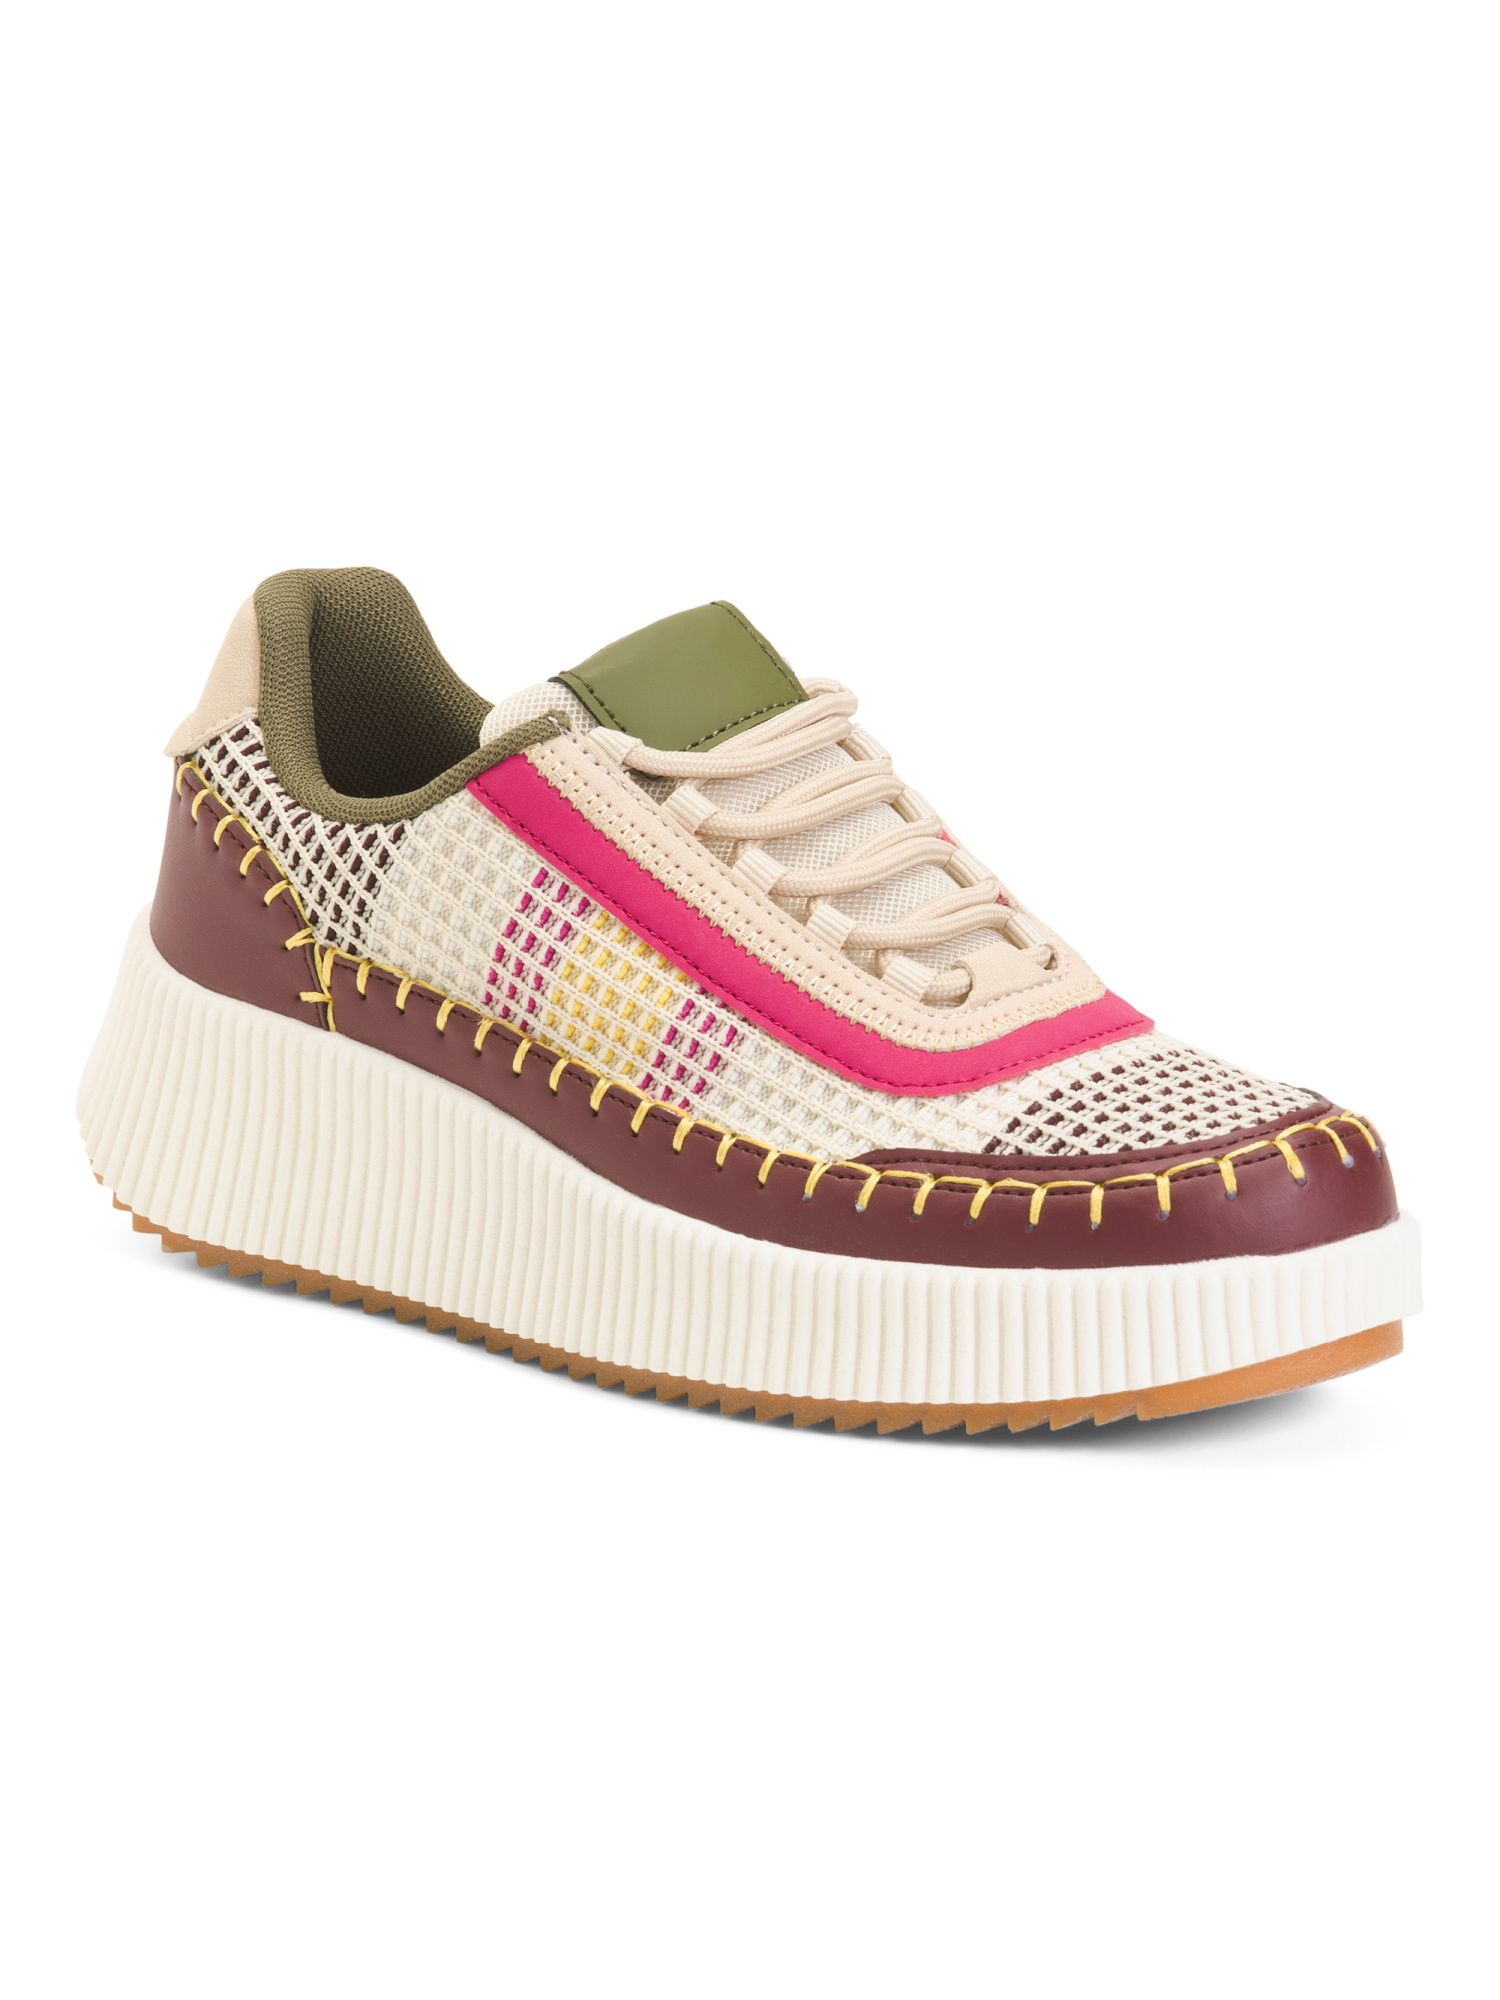 Bandy Lace Up Woven Sneakers | Casual Sneakers | Marshalls | Marshalls